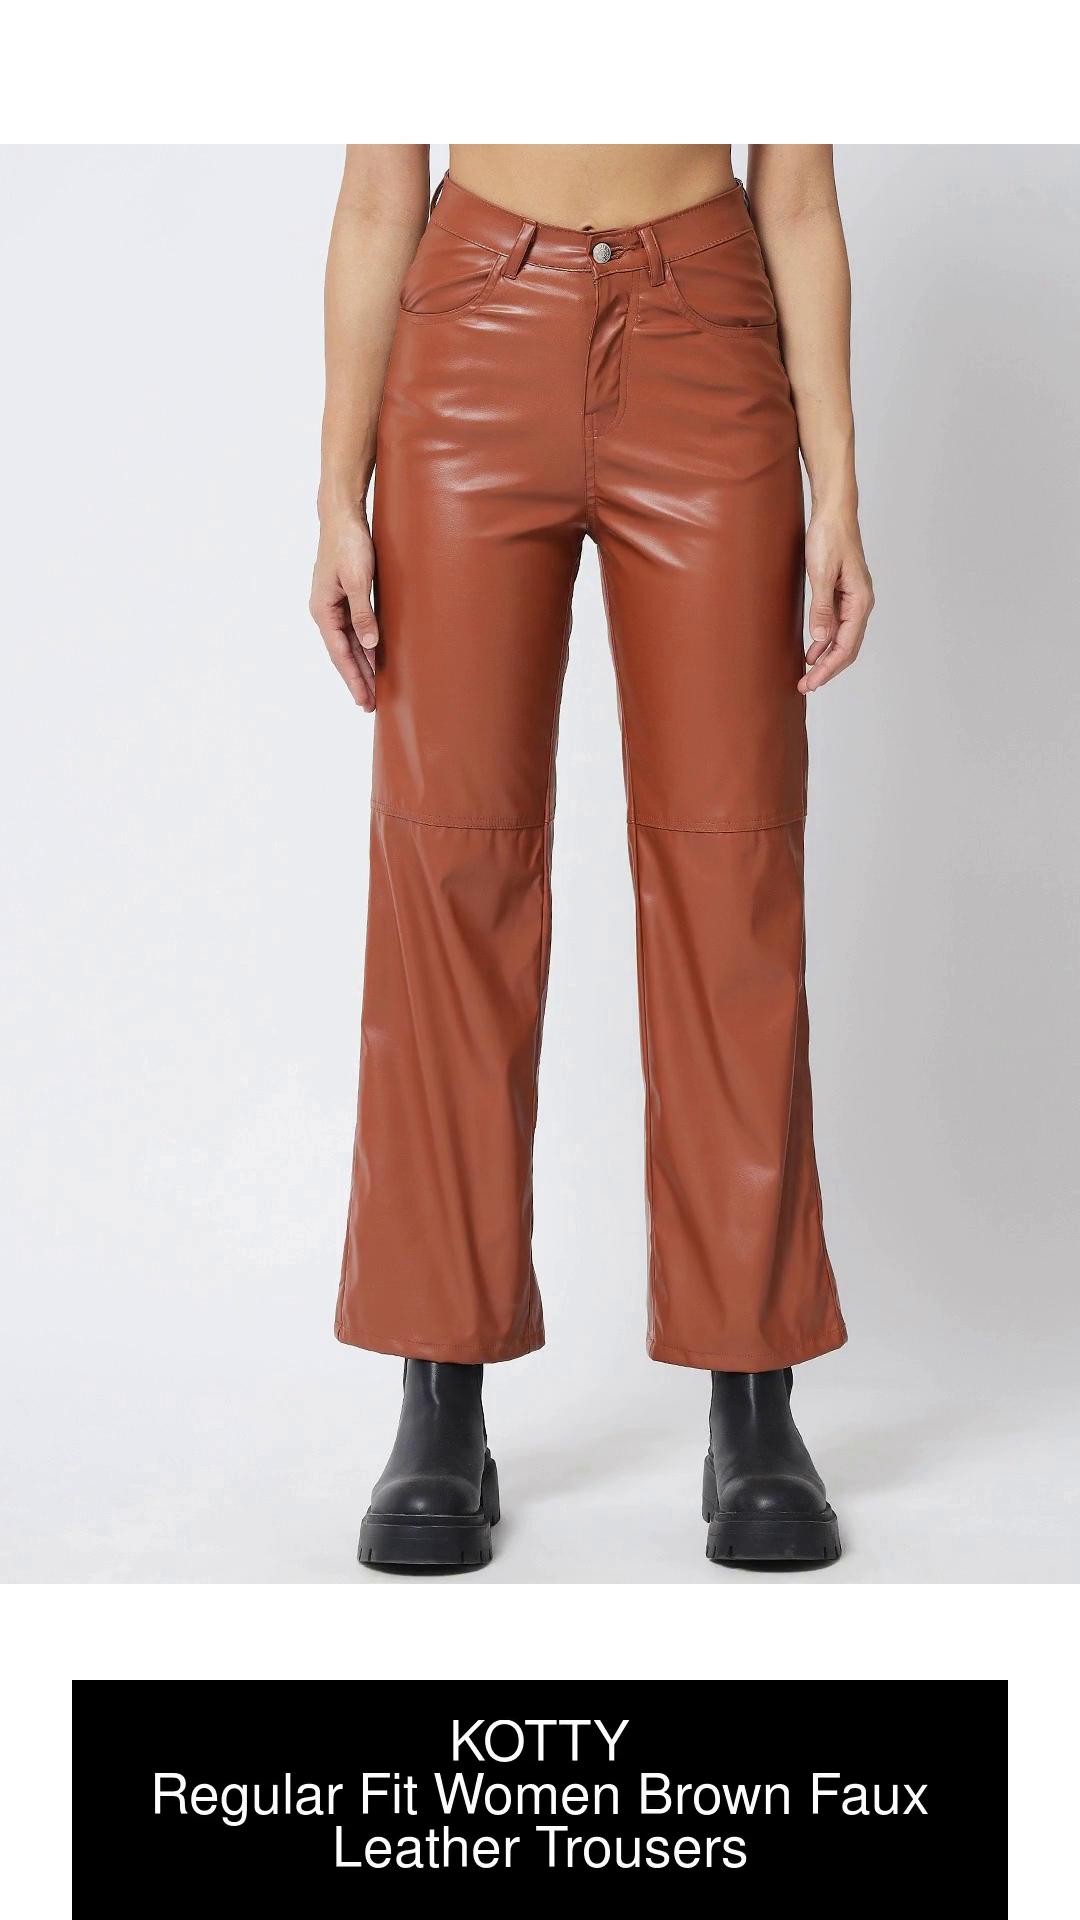 Rochelle Humes Brown Faux Leather Trousers This Morning January 2021   Fashion You Really Want